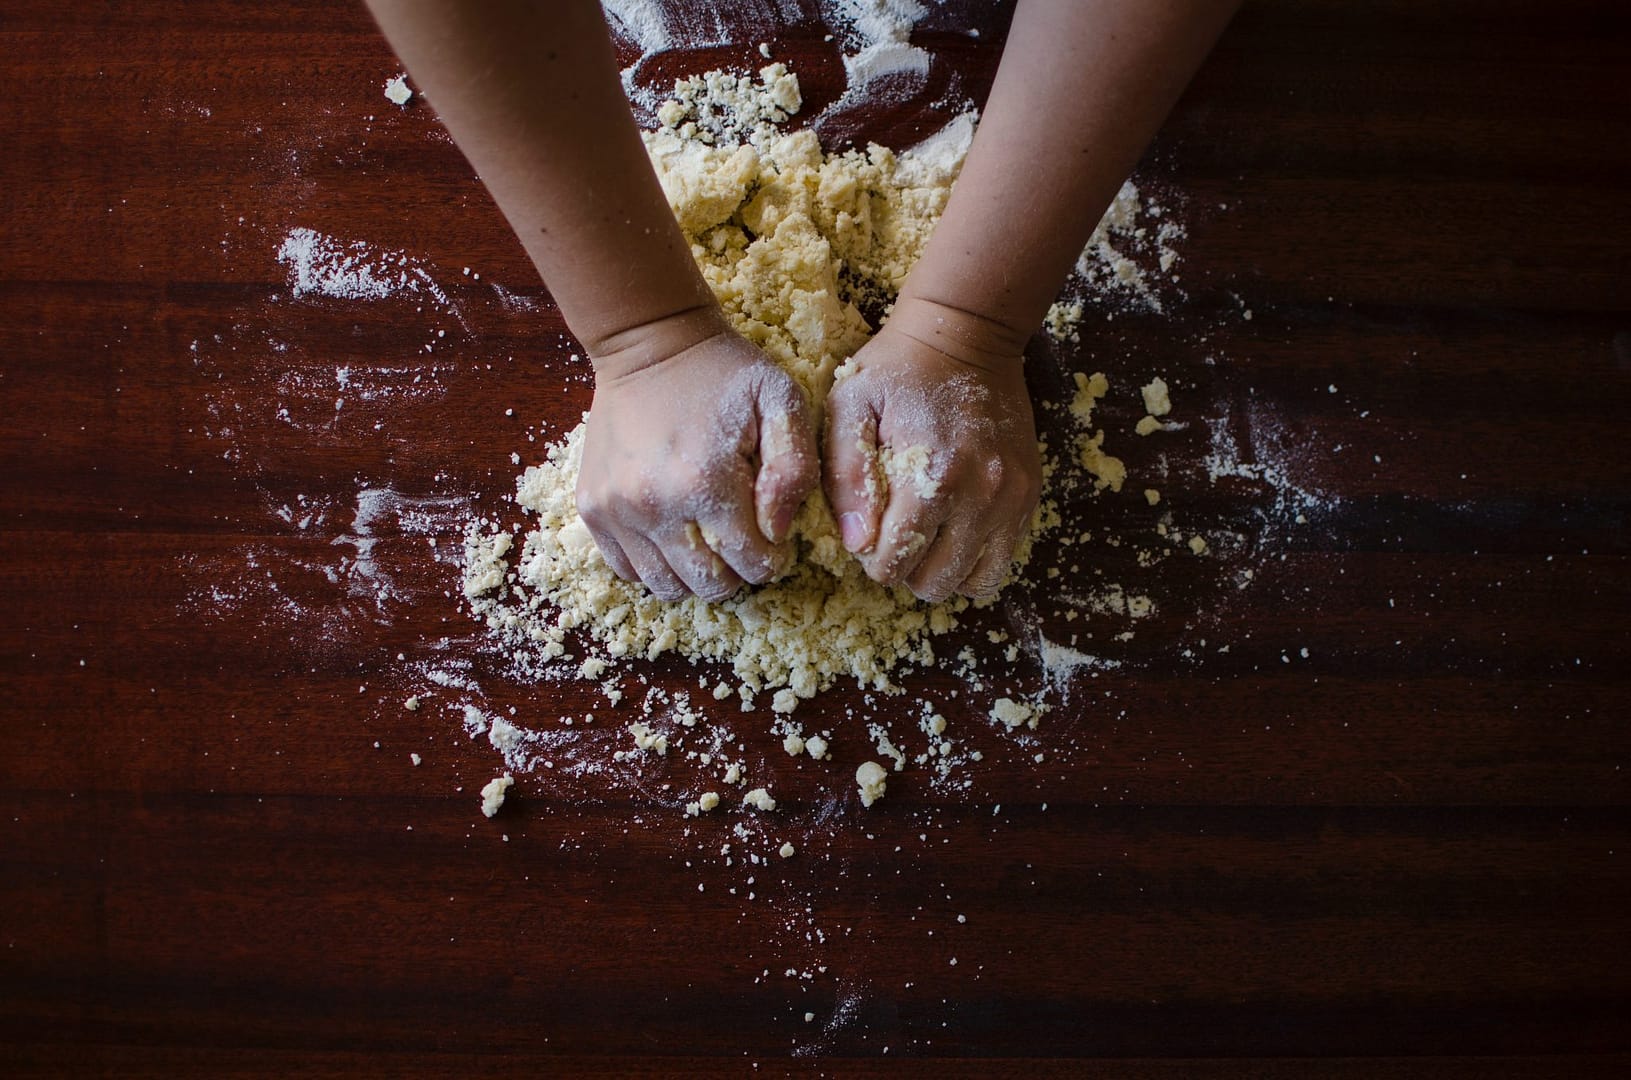 Mixing dough with both hands for baking